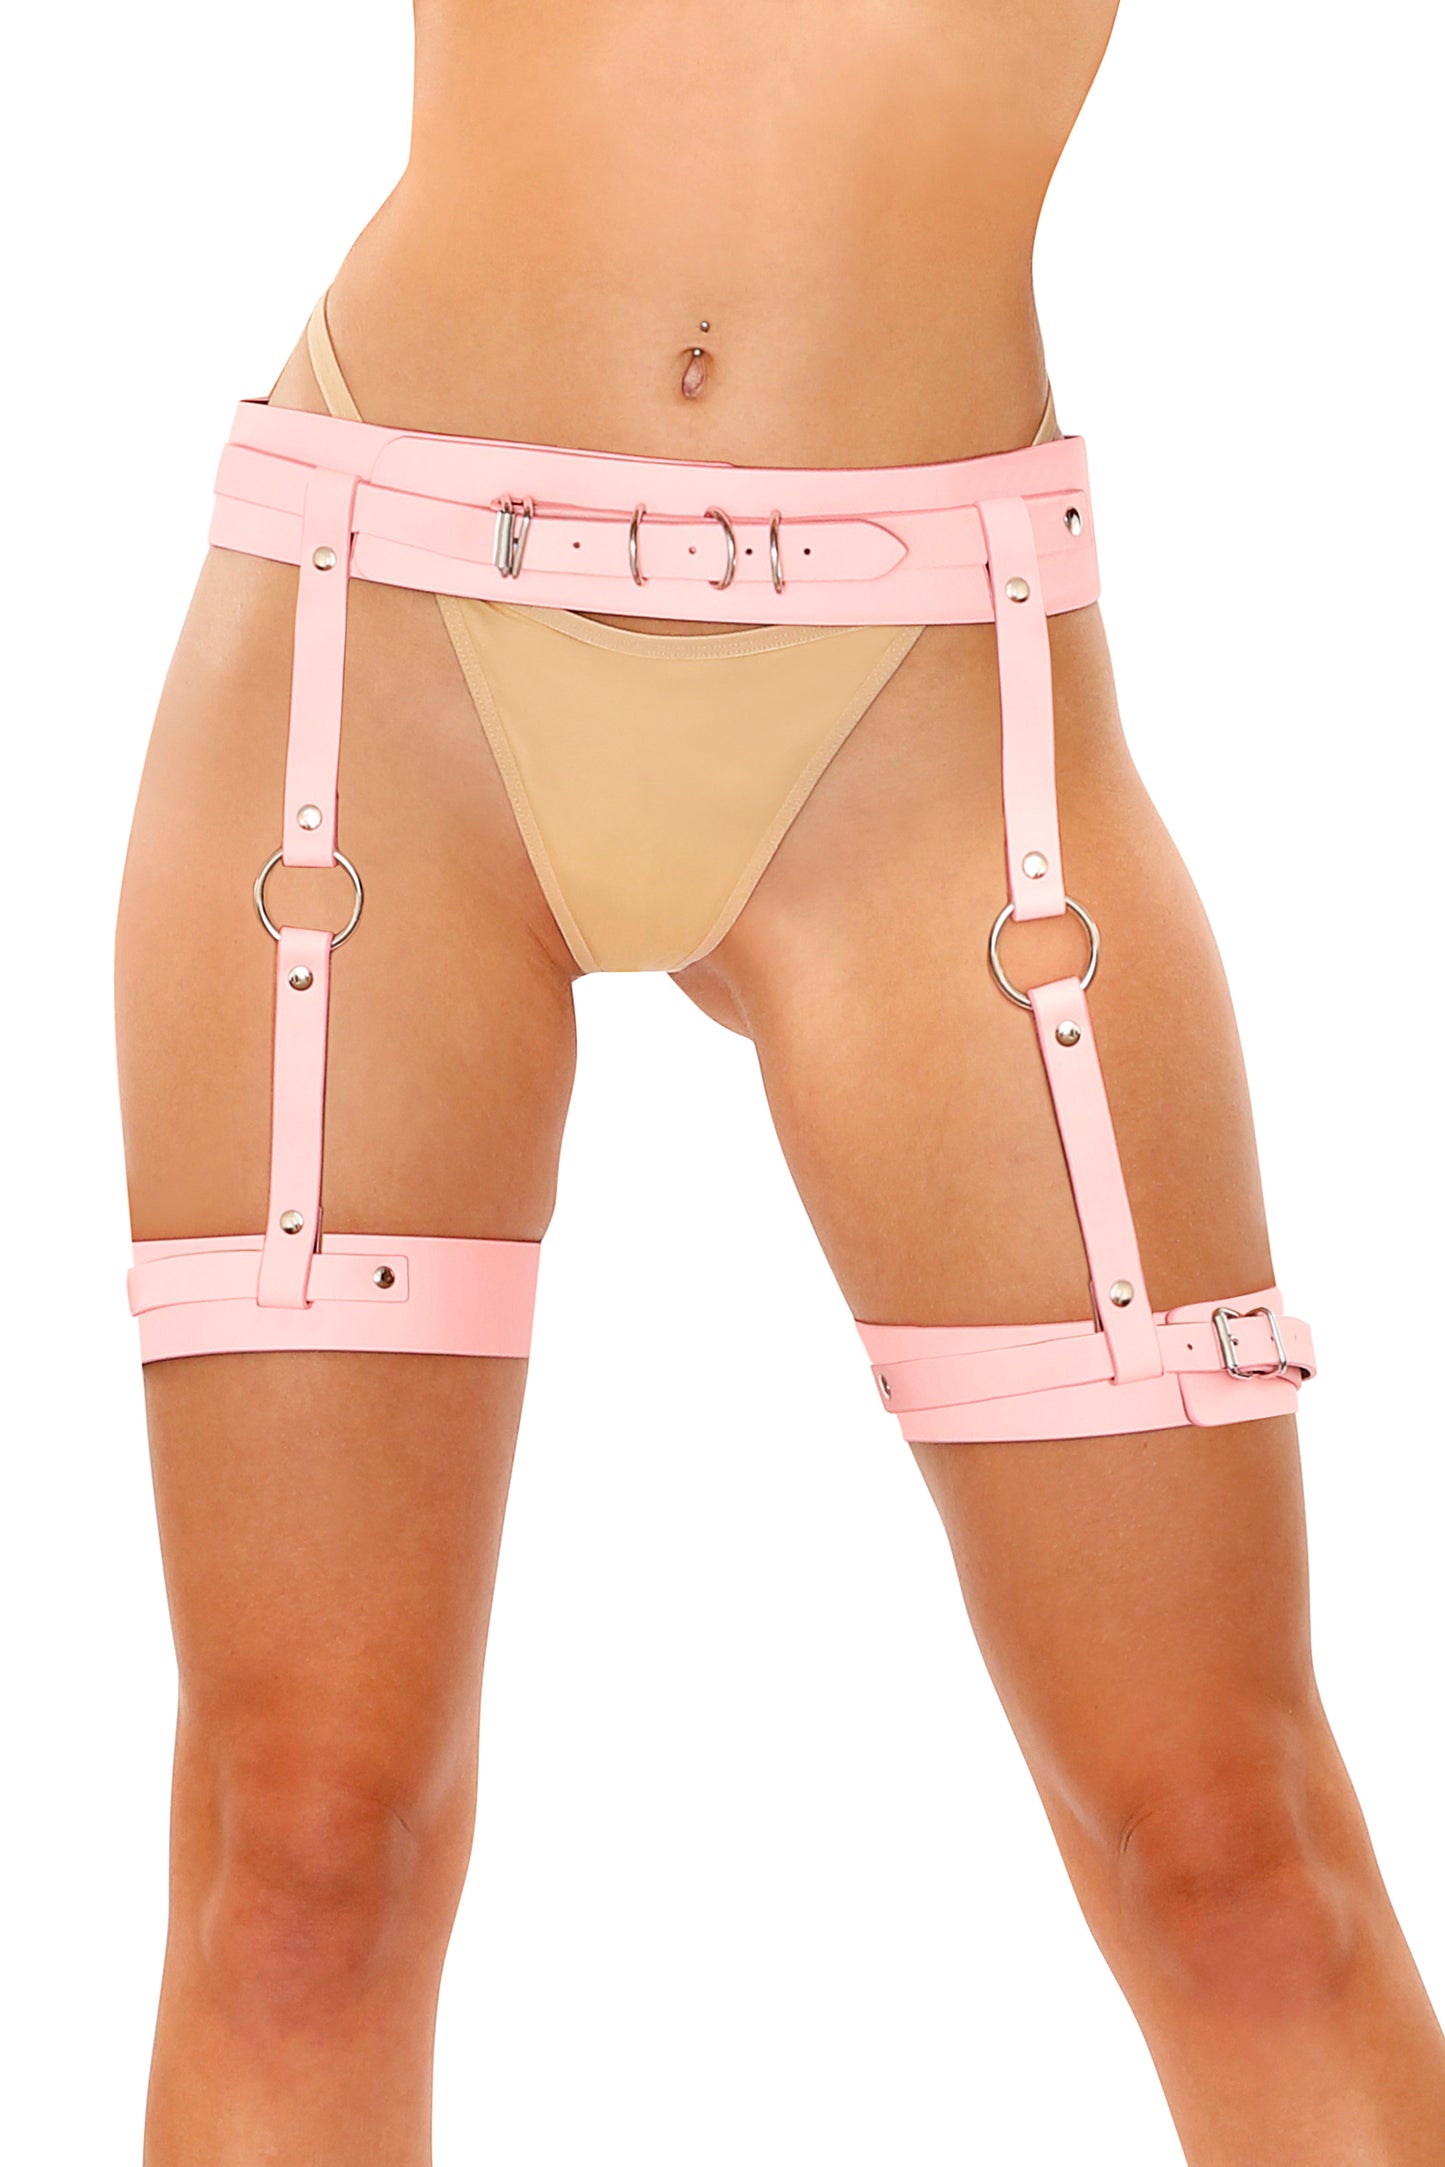 Strapped In Leg Harness